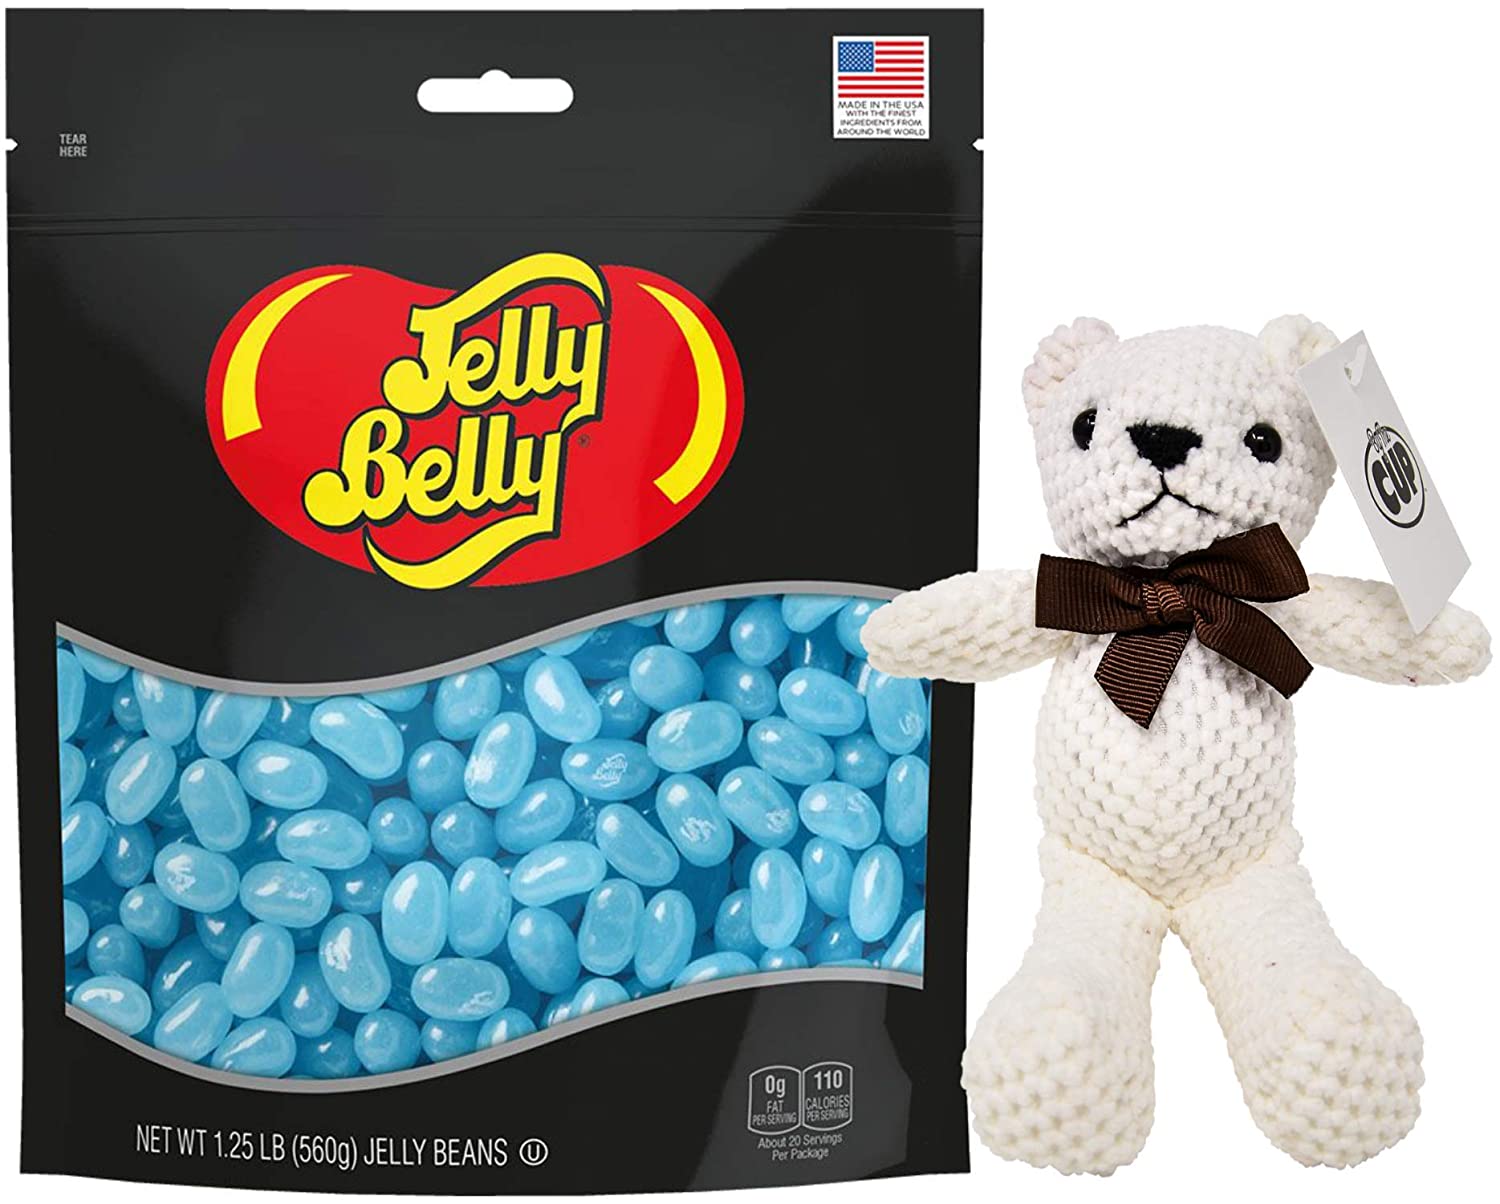 Jelly Belly Berry Blue Jelly Beans 1.25 lb Resealable Bag with By The Cup Teddy Bear